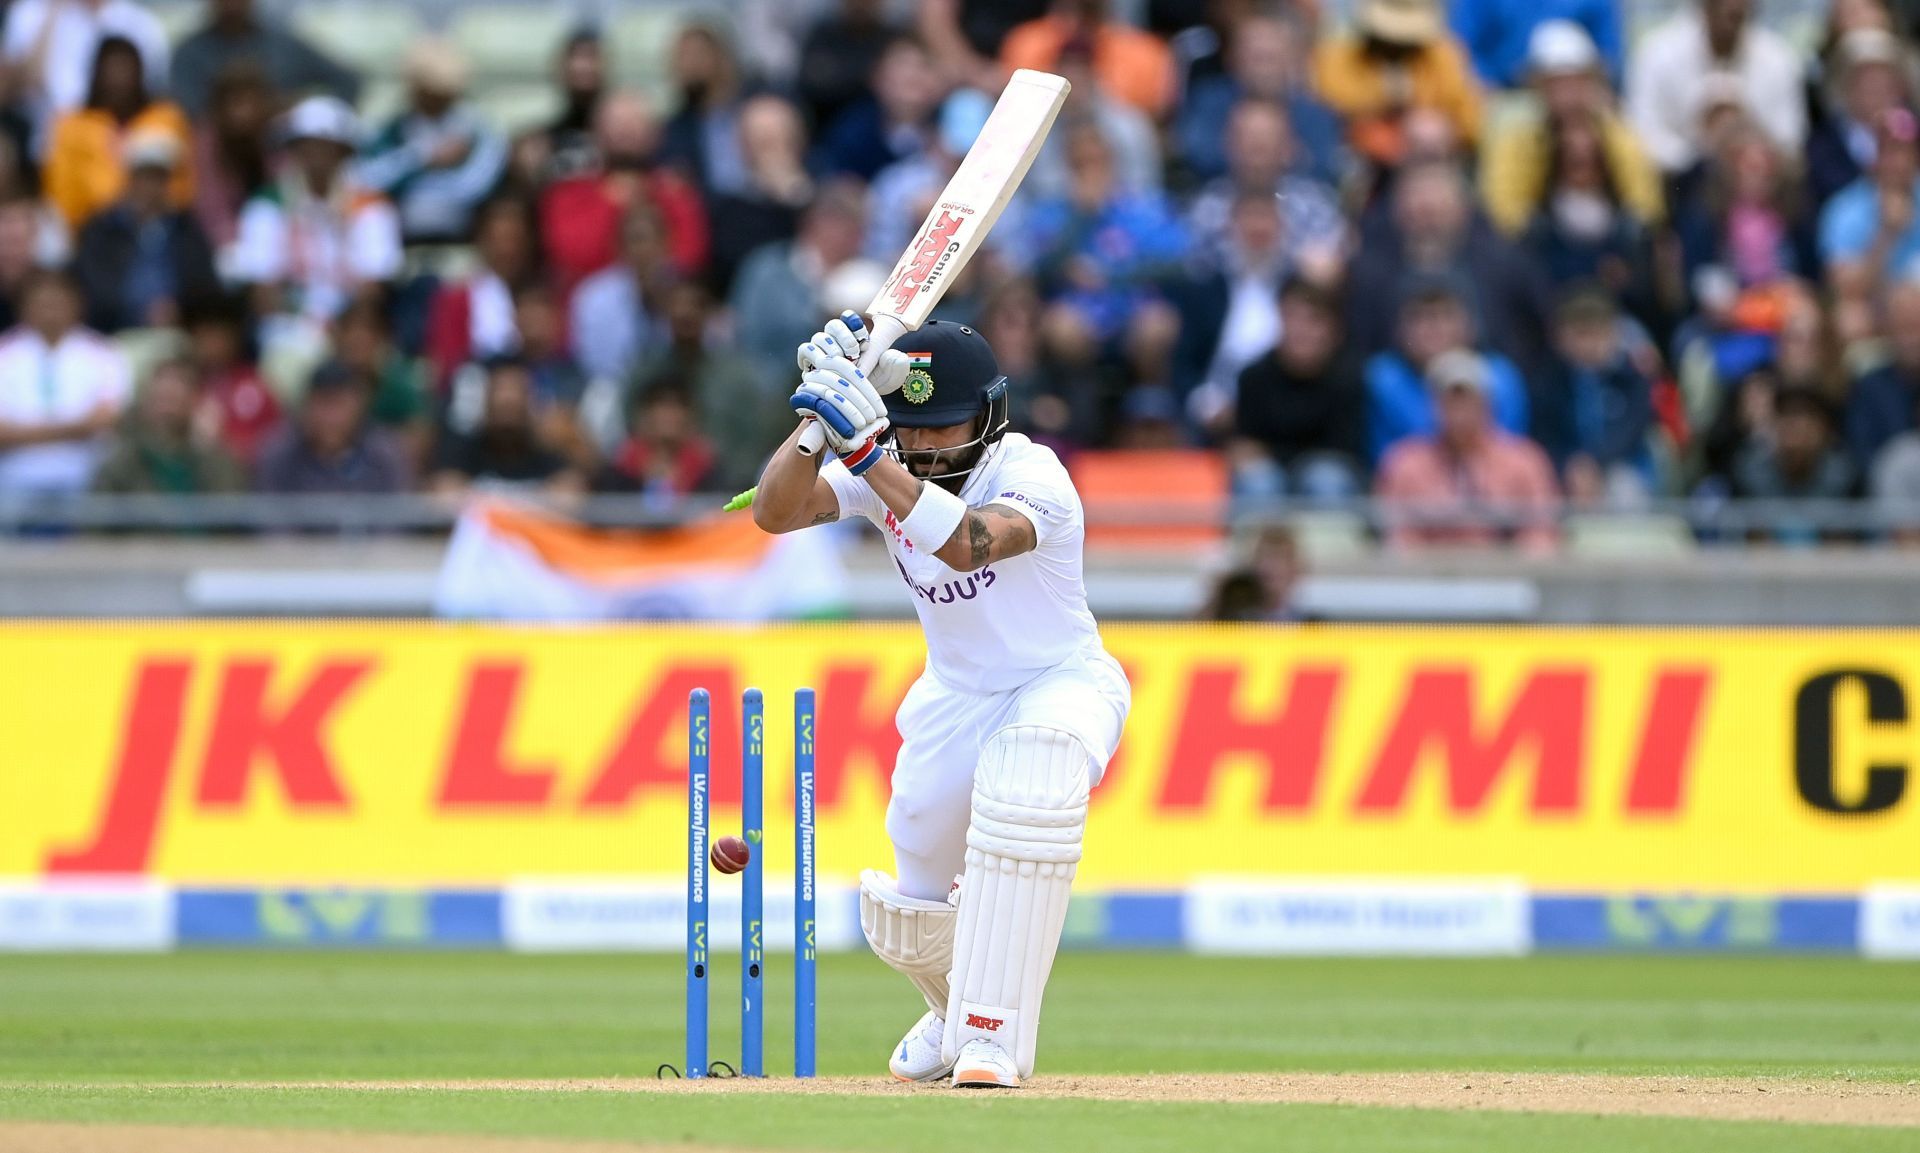 Virat Kohli is bowled by Matthew Potts during day one of the 5th Test. Pic: Getty Images